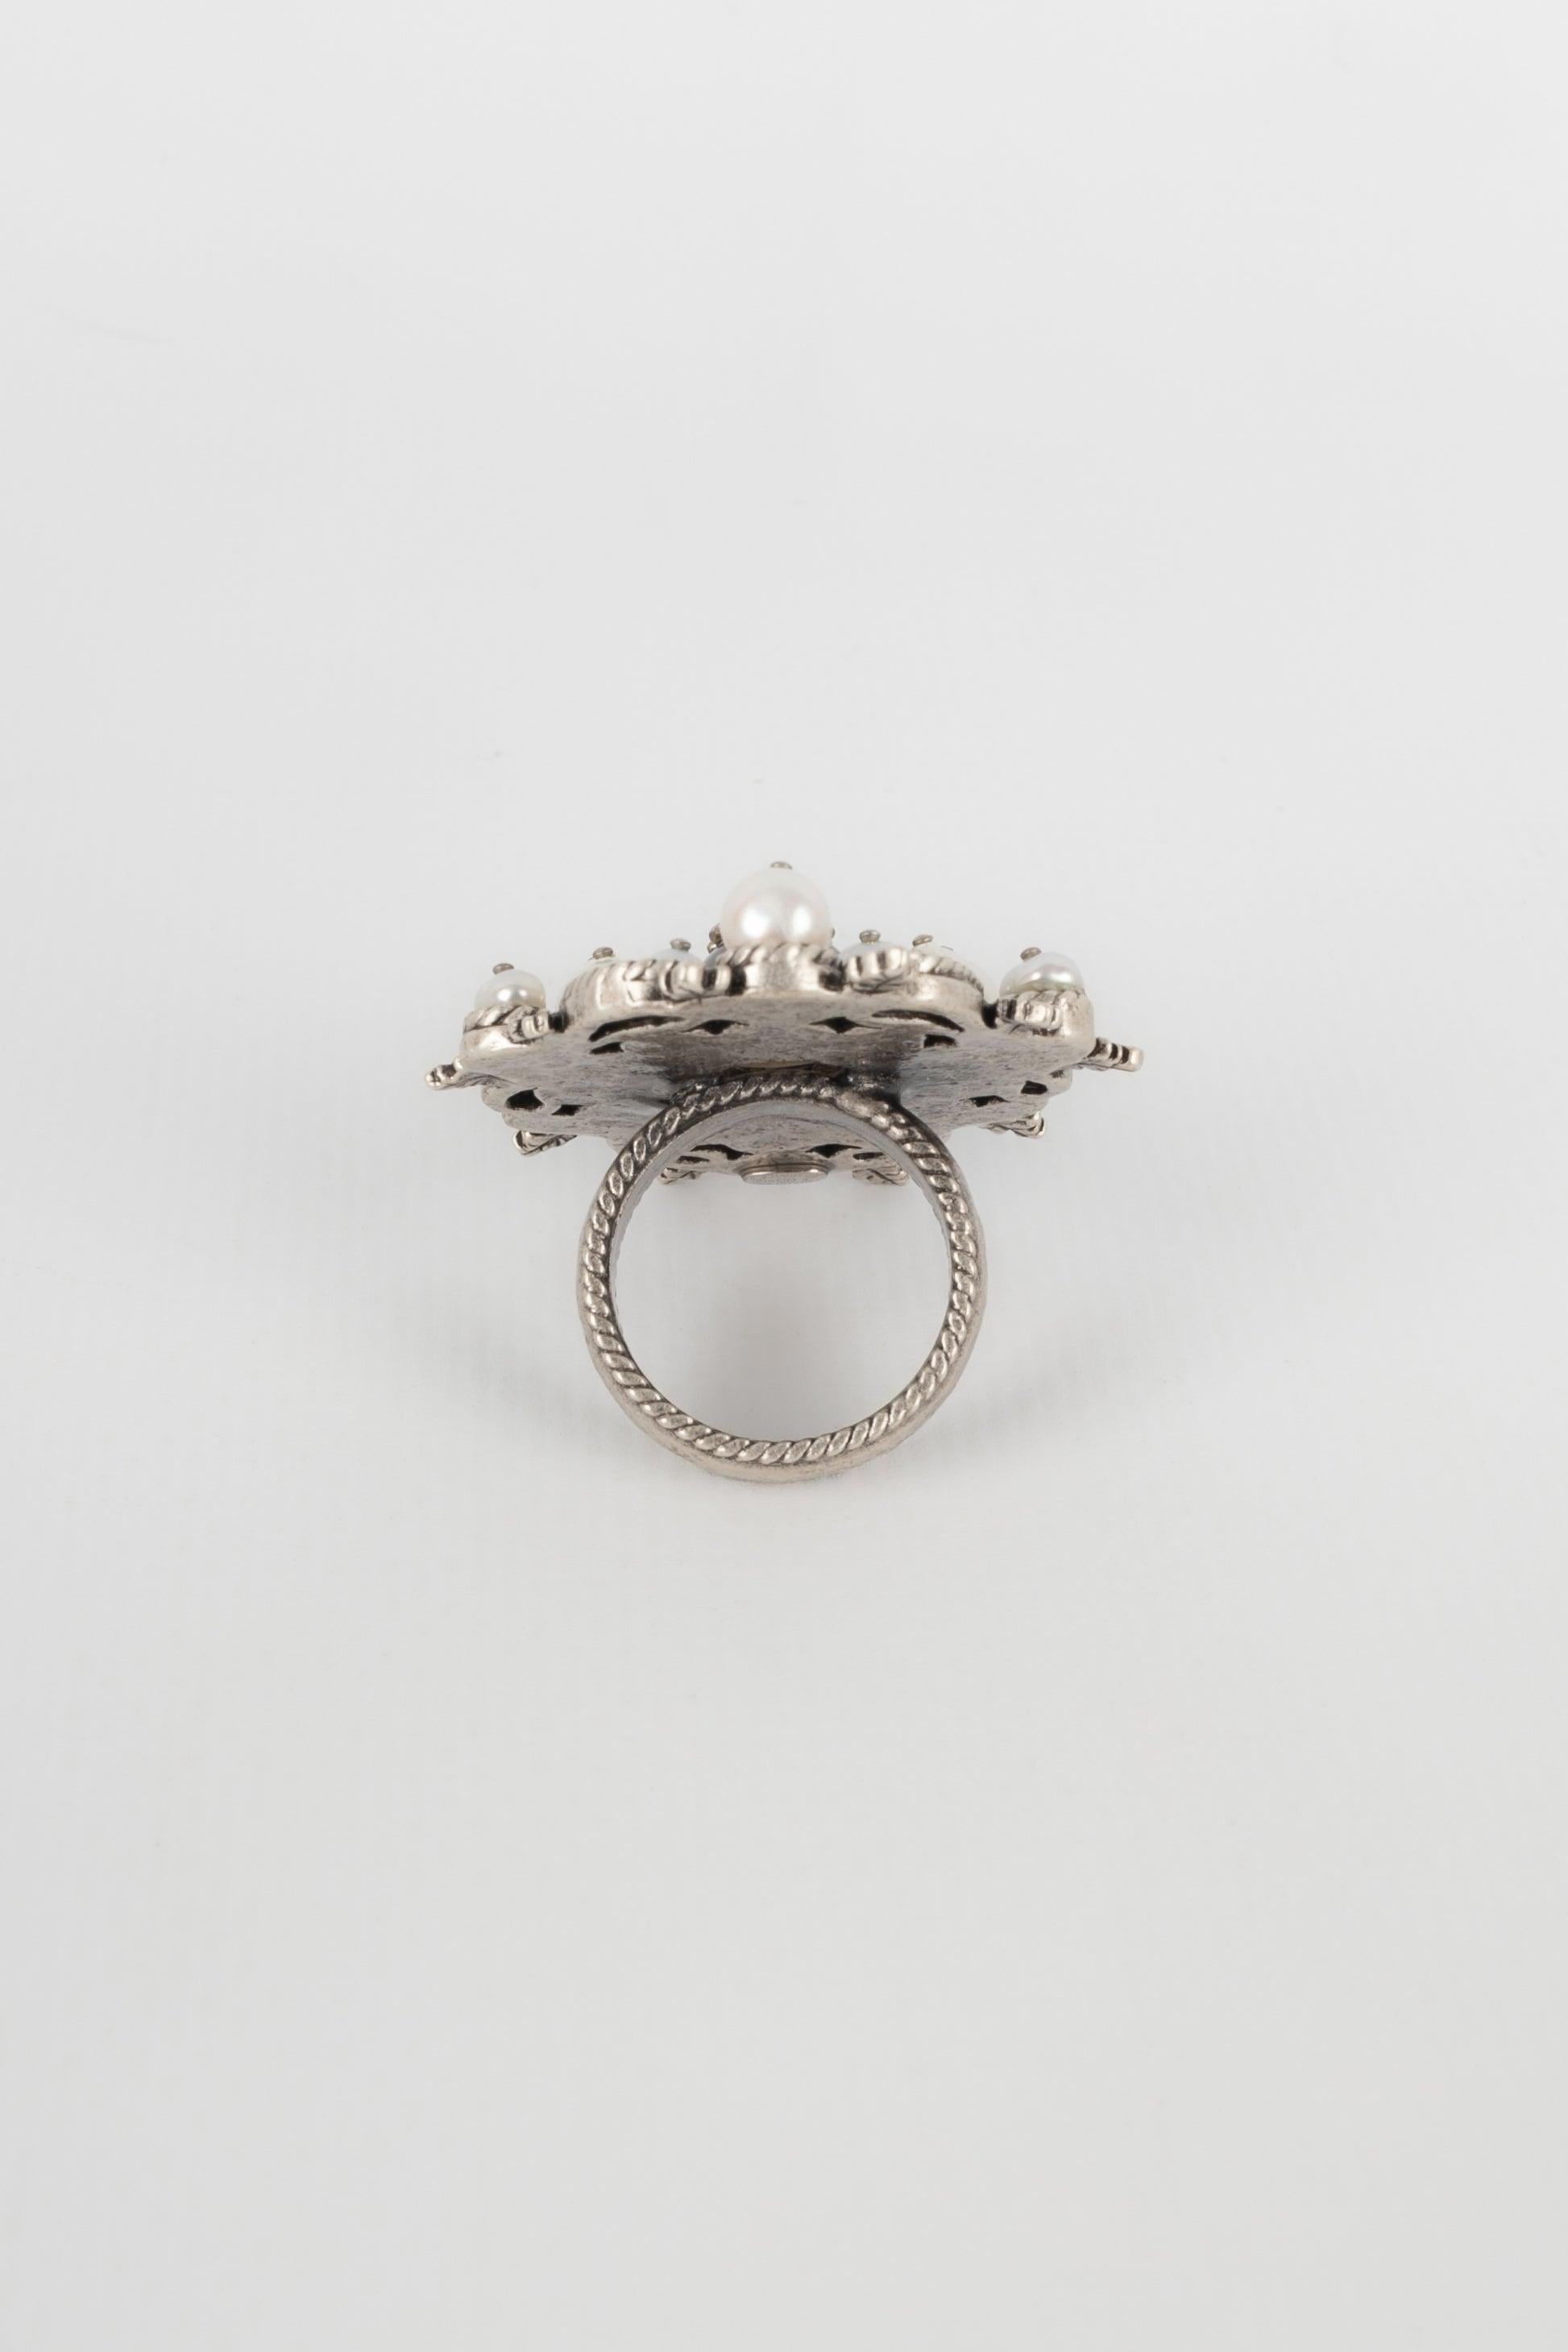 Chanel Silvery Metal CC Ring with Costume Pearls, 2015 For Sale 1